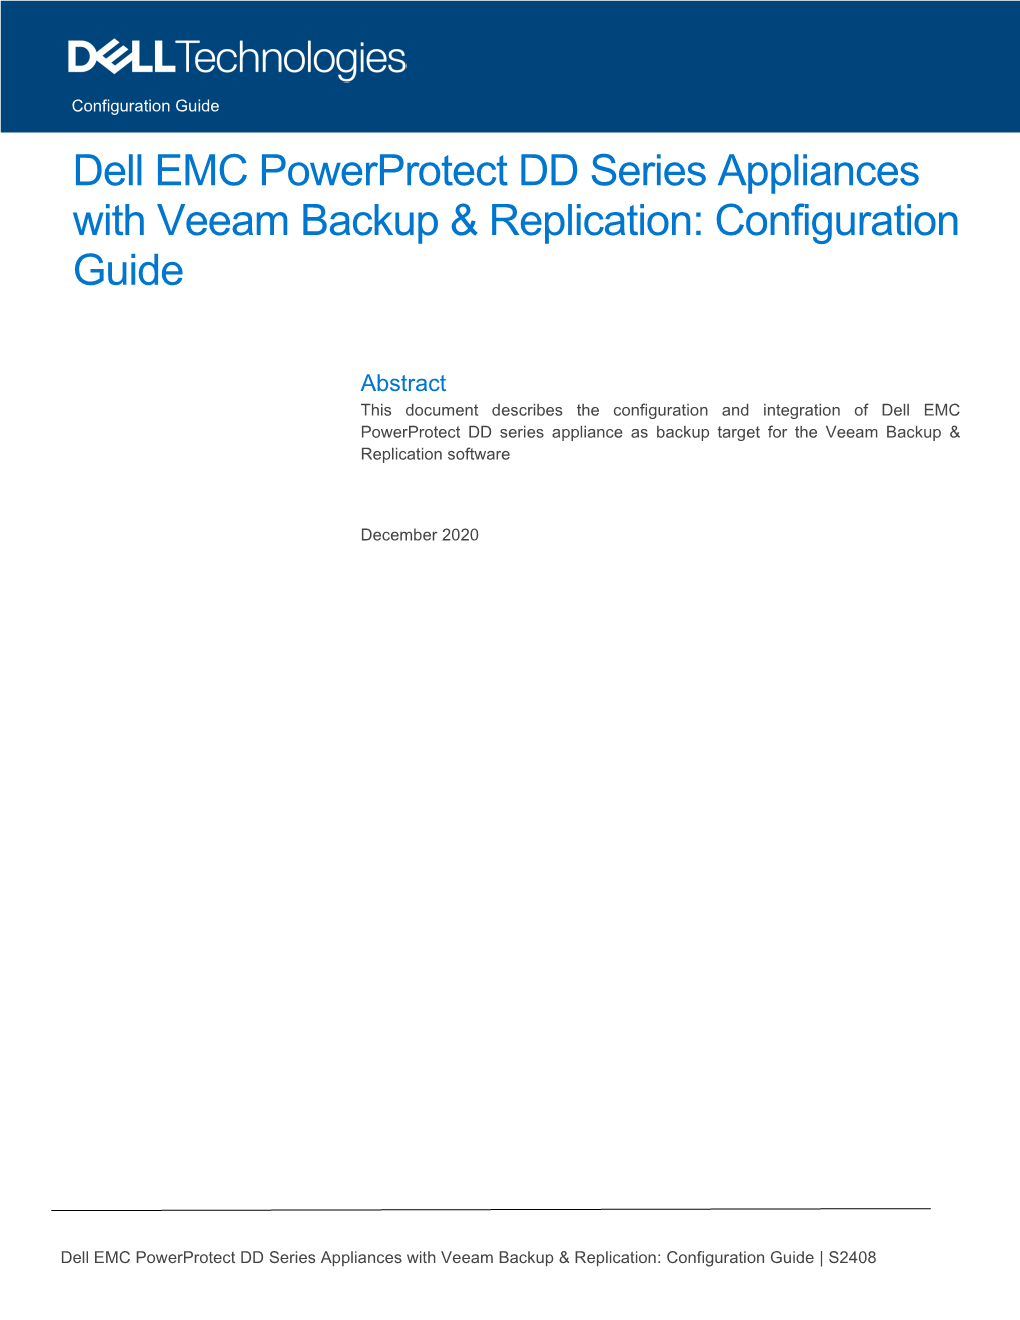 Dell EMC Powerprotect DD Series Appliances with Veeam Backup & Replication: Configuration Guide